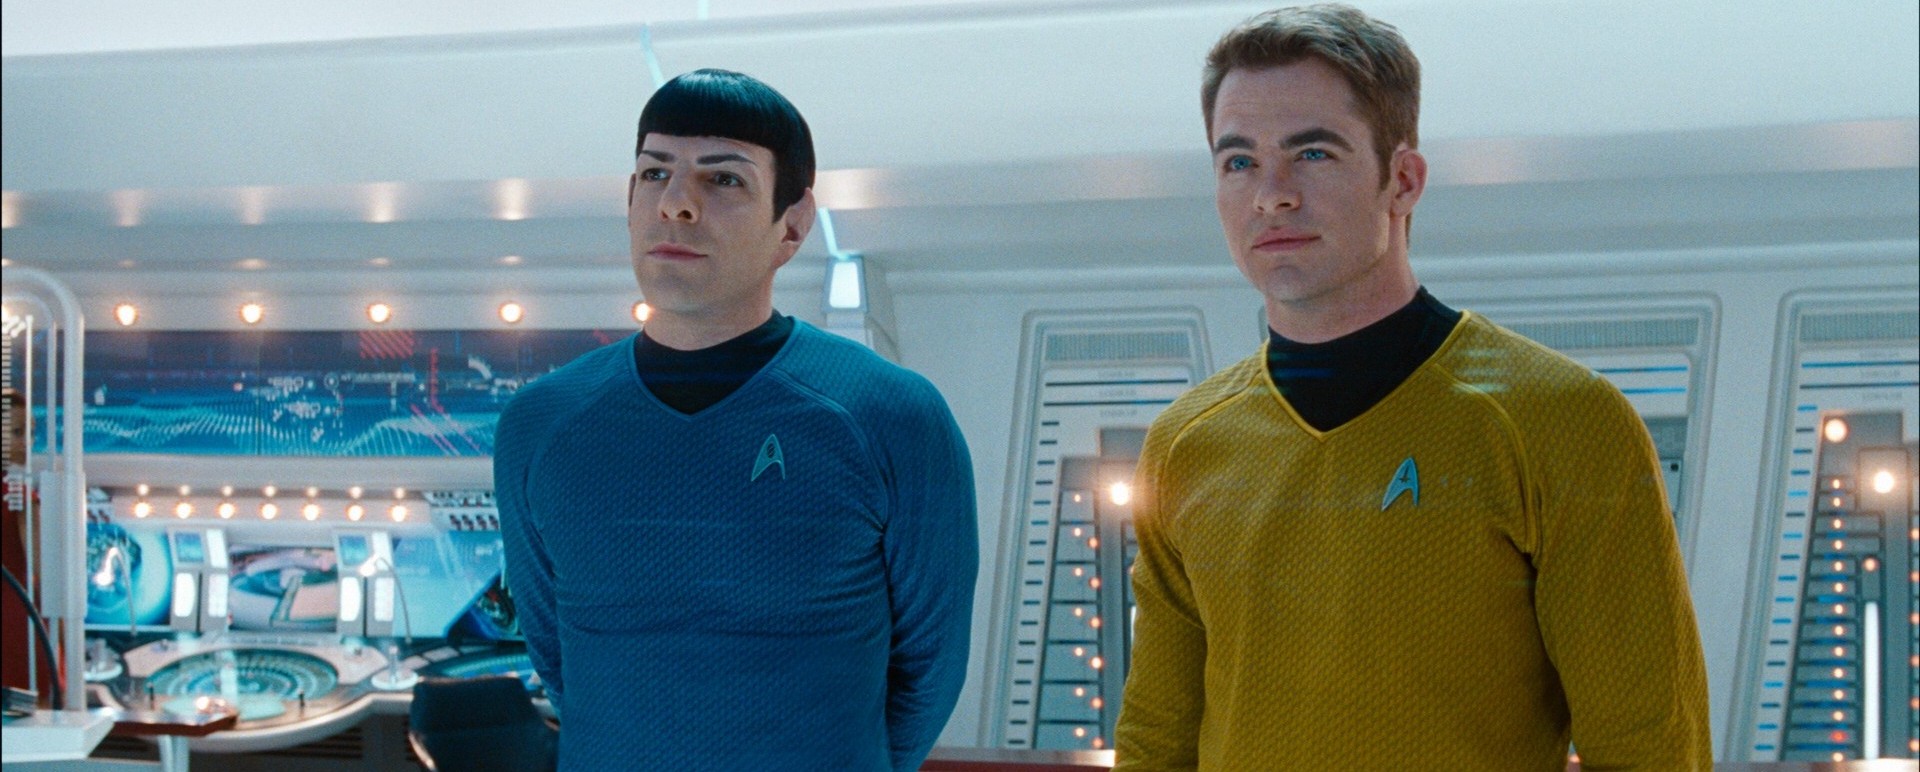 Star Trek Into Darkness", James T. Kirk and Spock. 